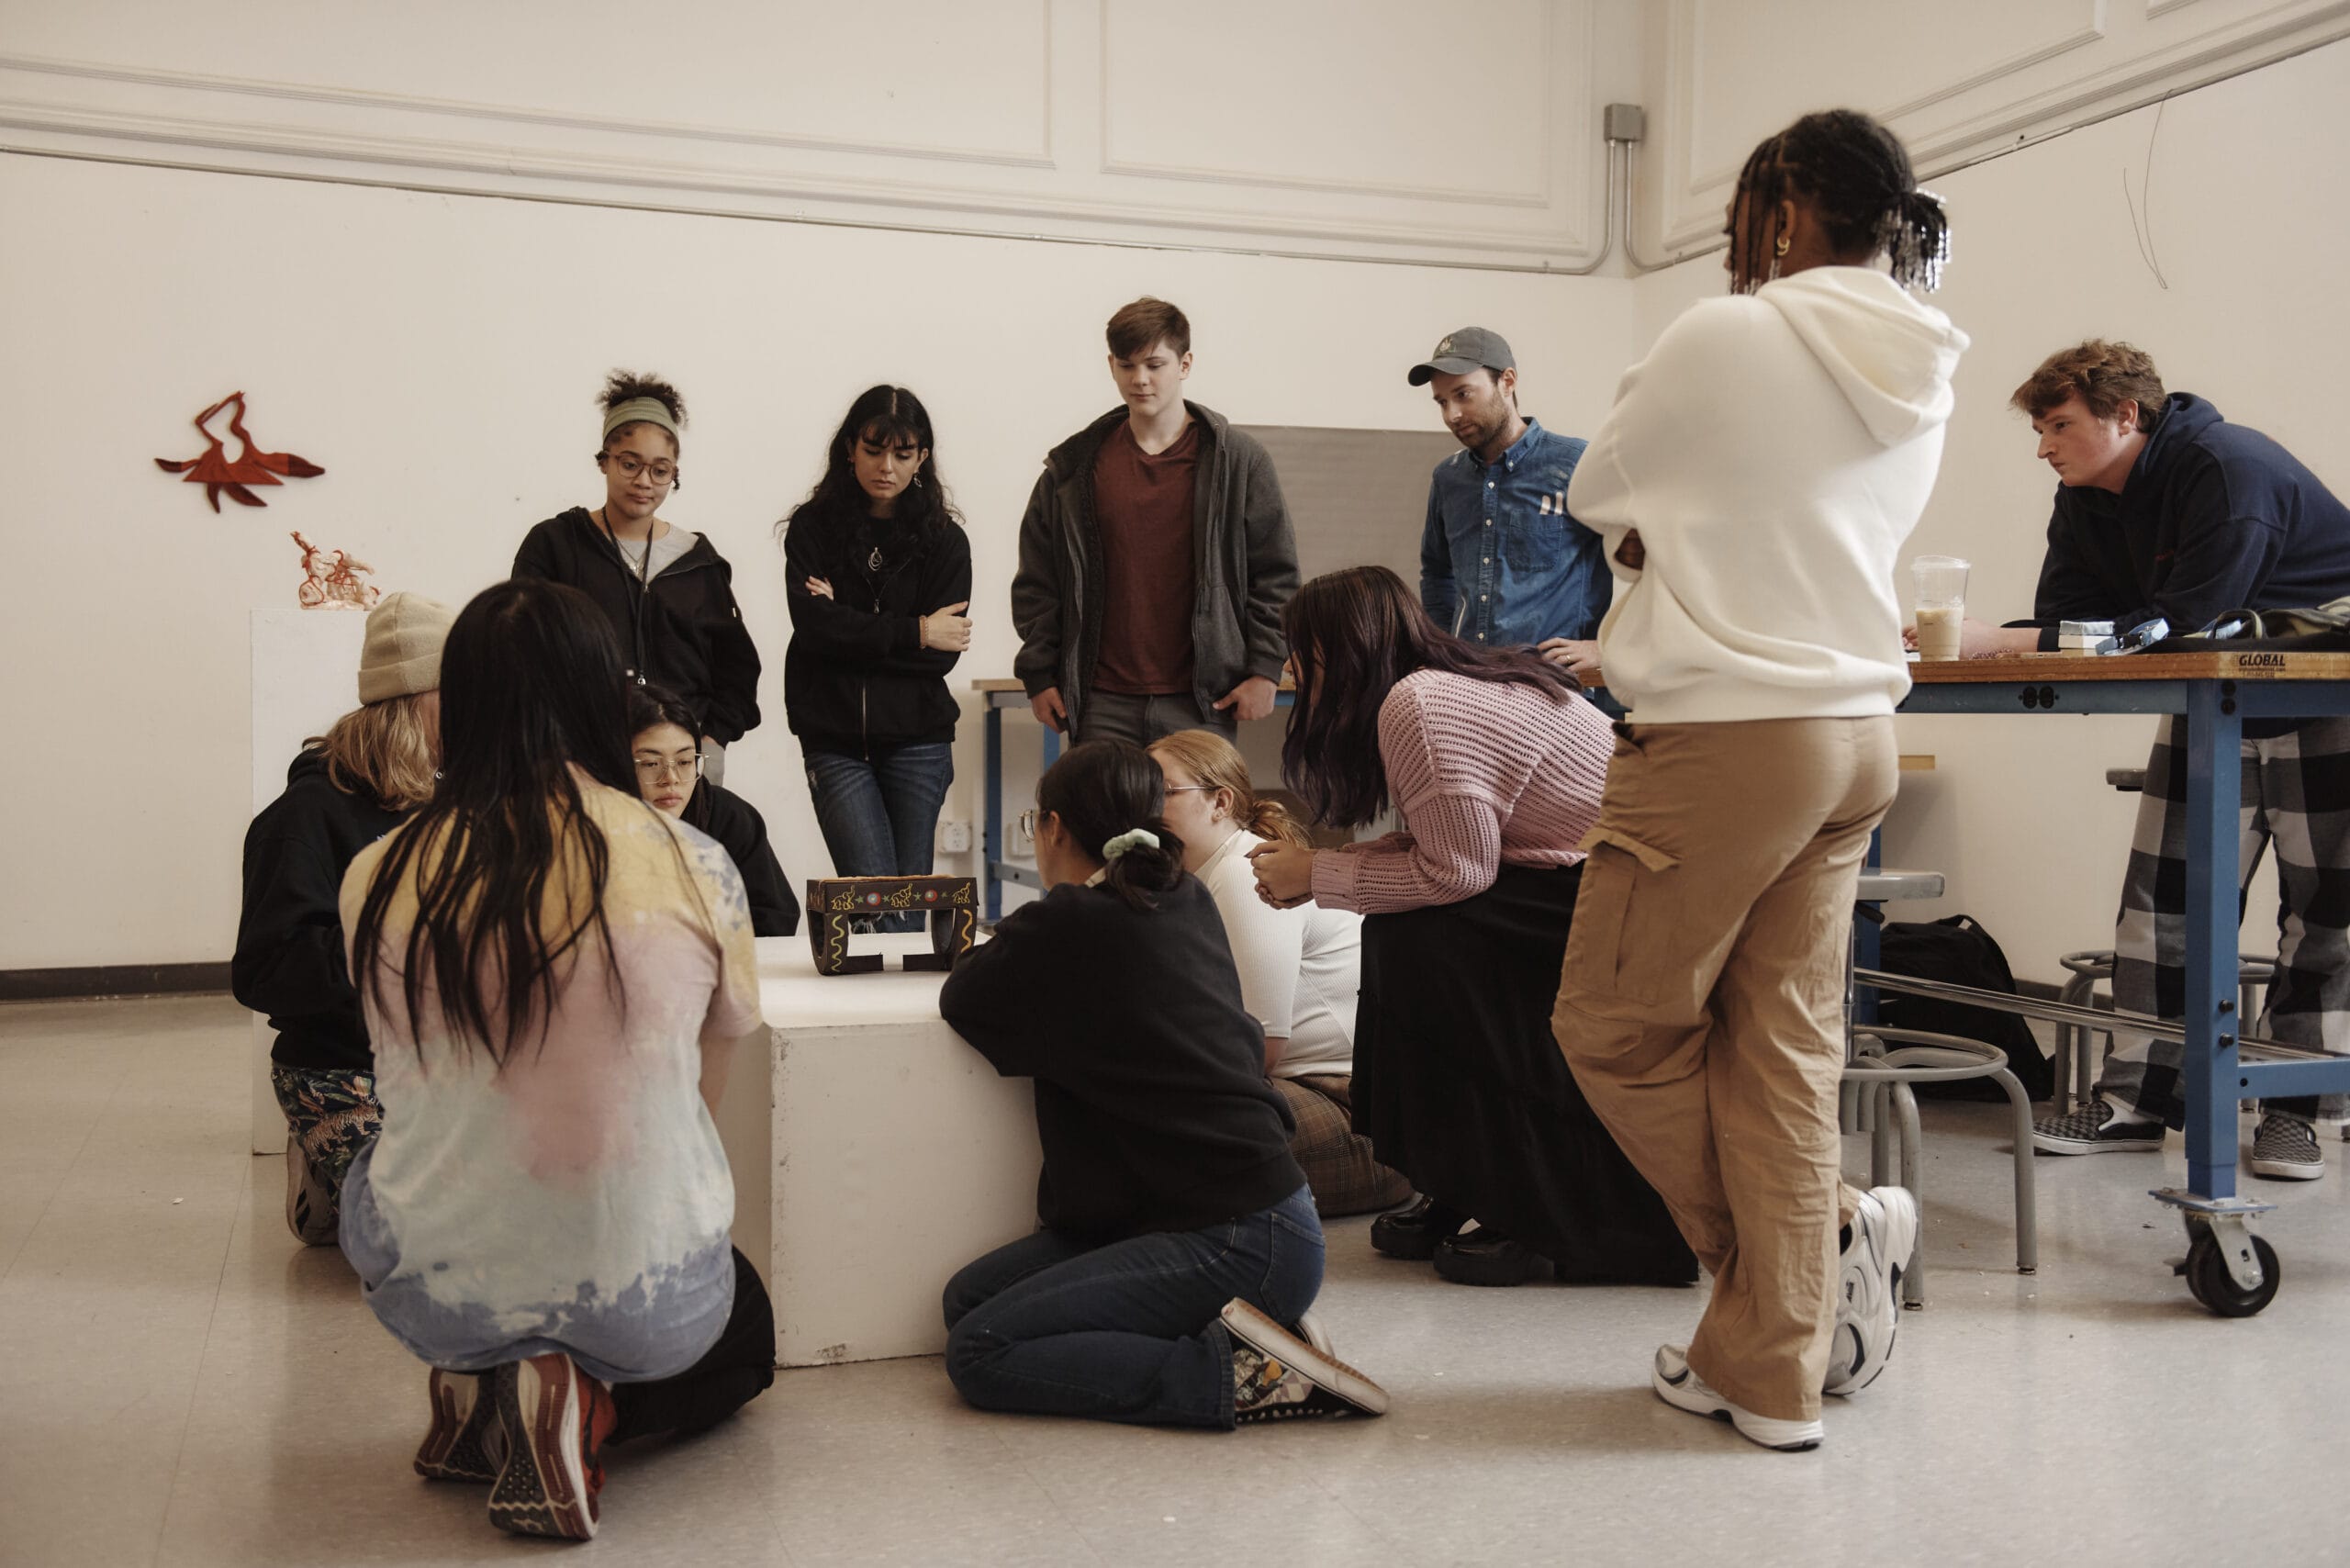 Students crowd around a pedestal to examine an artwork in a Studio Foundation class.